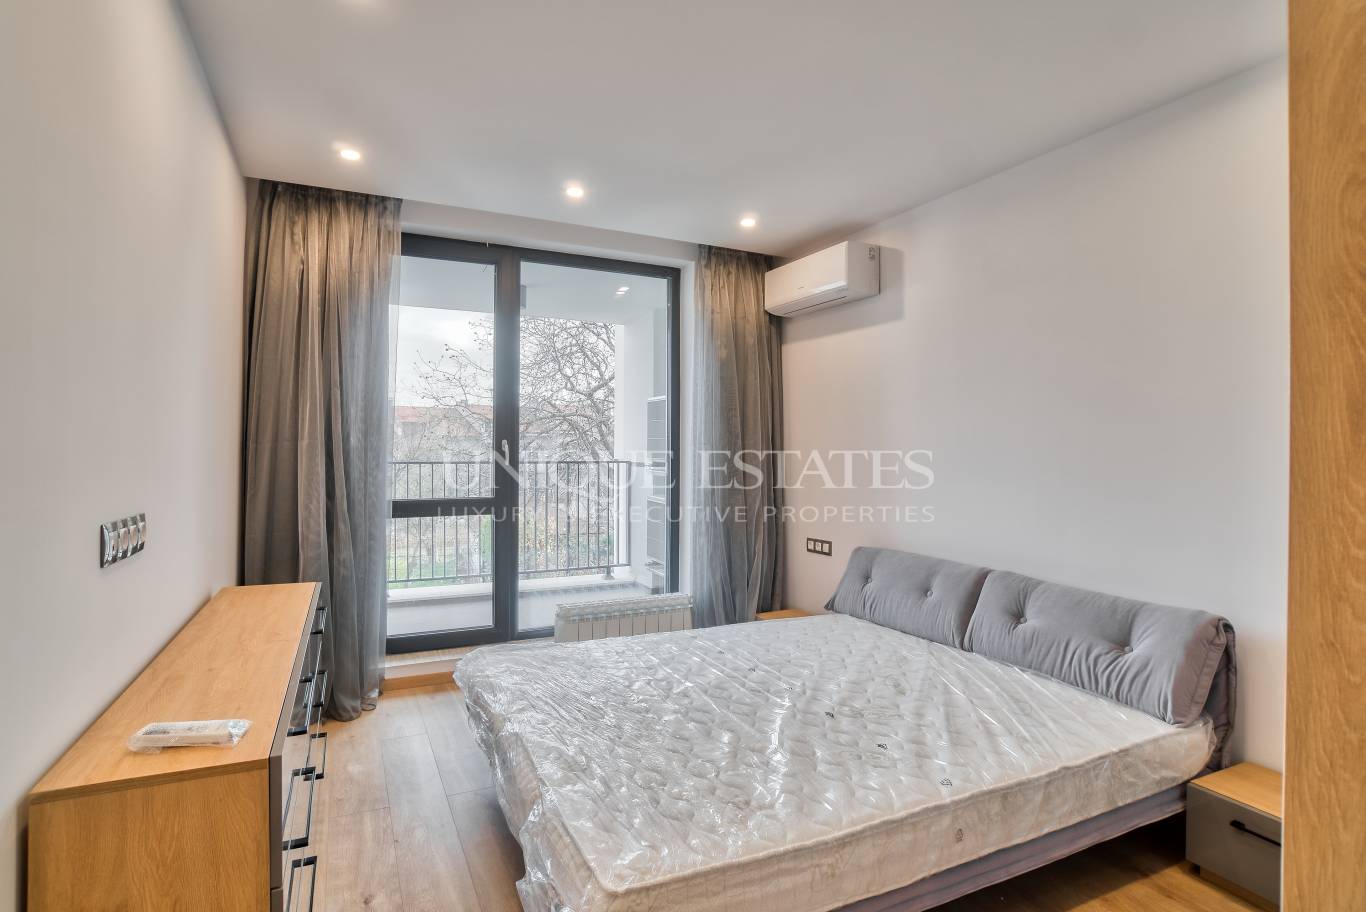 Apartment for rent in Sofia, Boyana with listing ID: N16421 - image 6